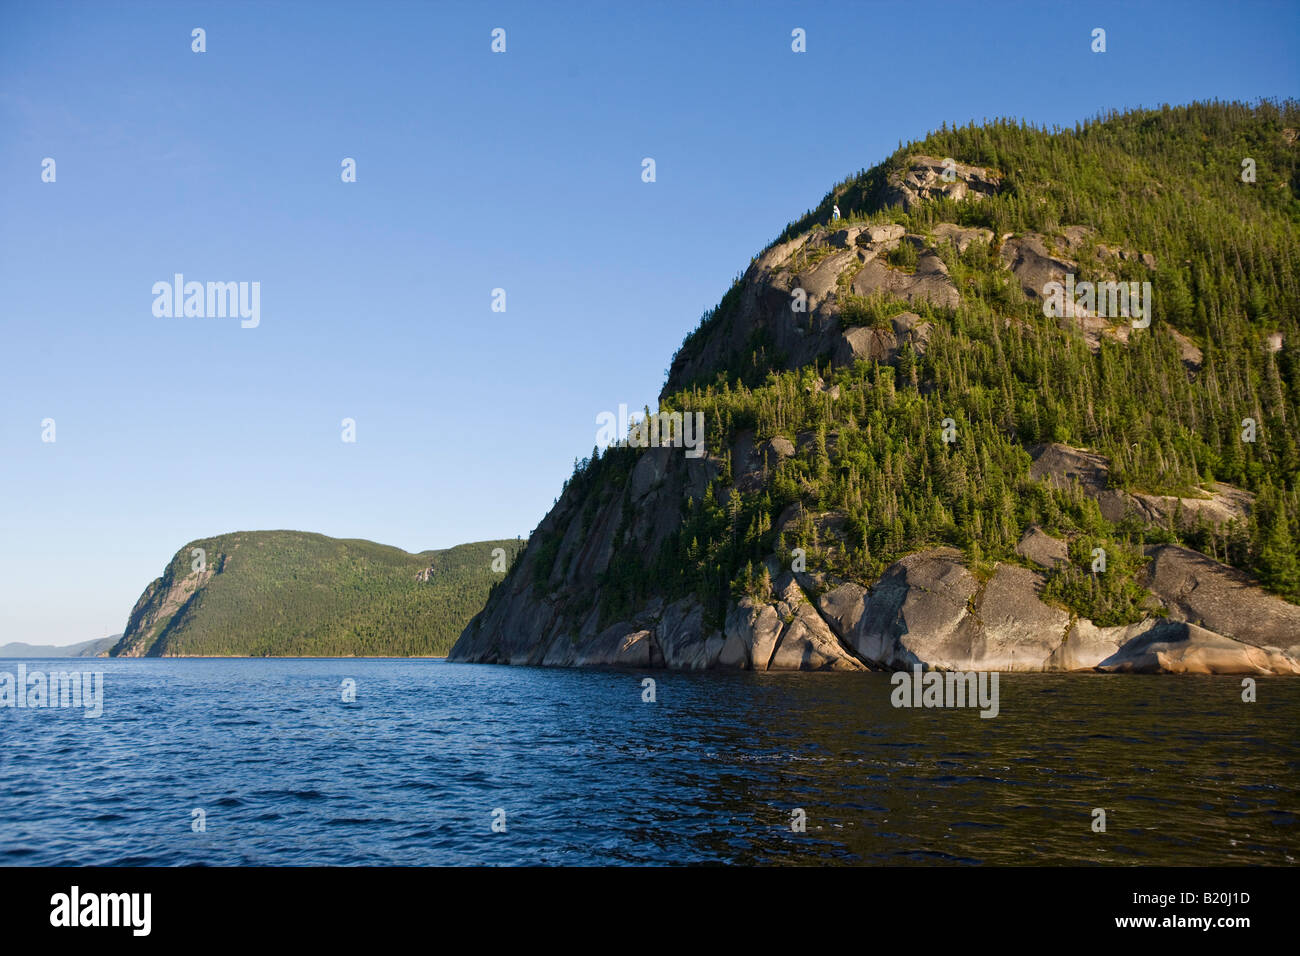 Cap Eternite (right) and Cap Liberte (left) in the Saguenay Fjord in Saguenay National Park. Quebec, Canada. Stock Photo